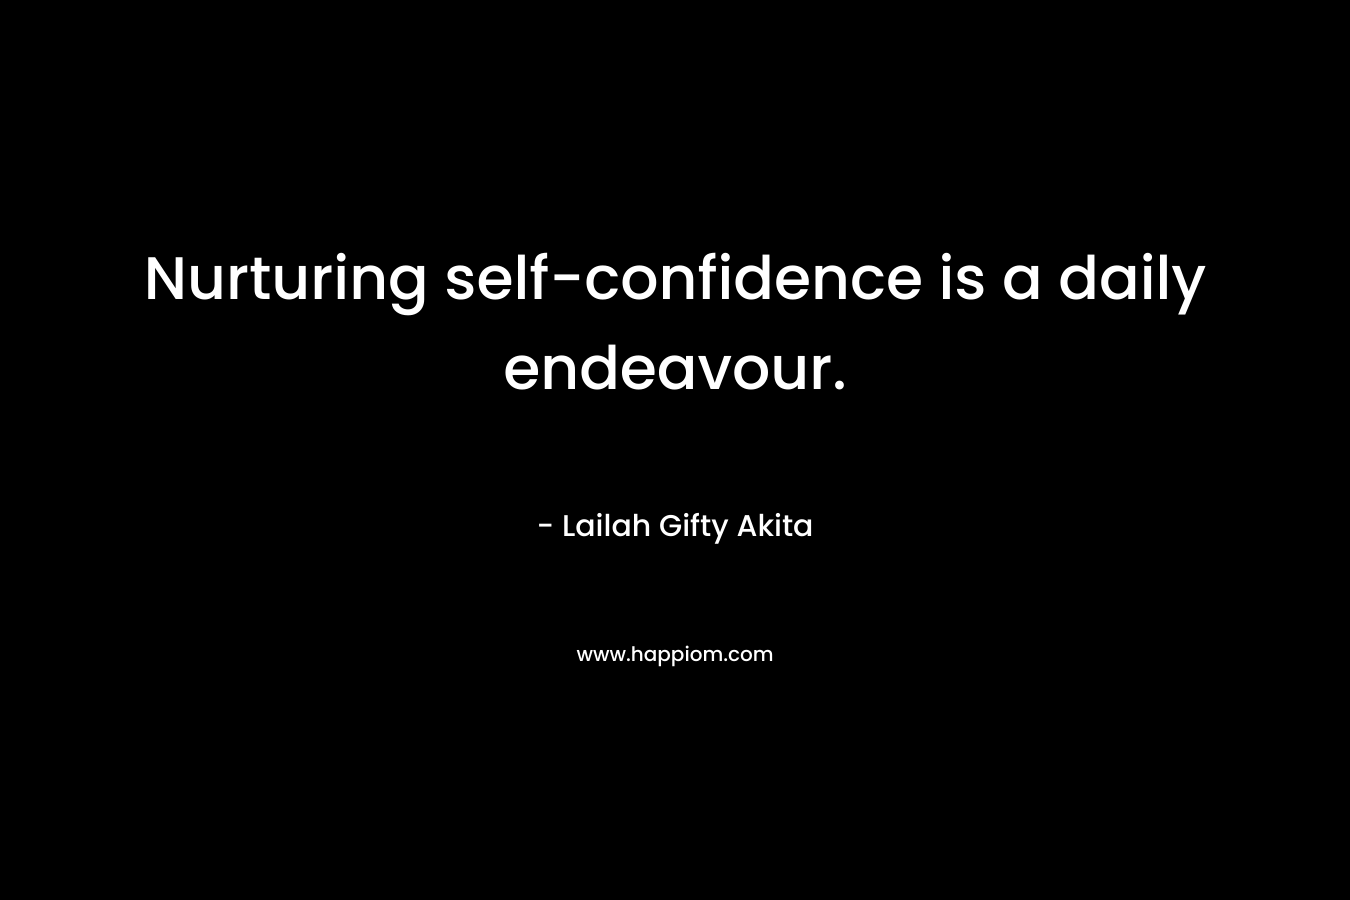 Nurturing self-confidence is a daily endeavour.